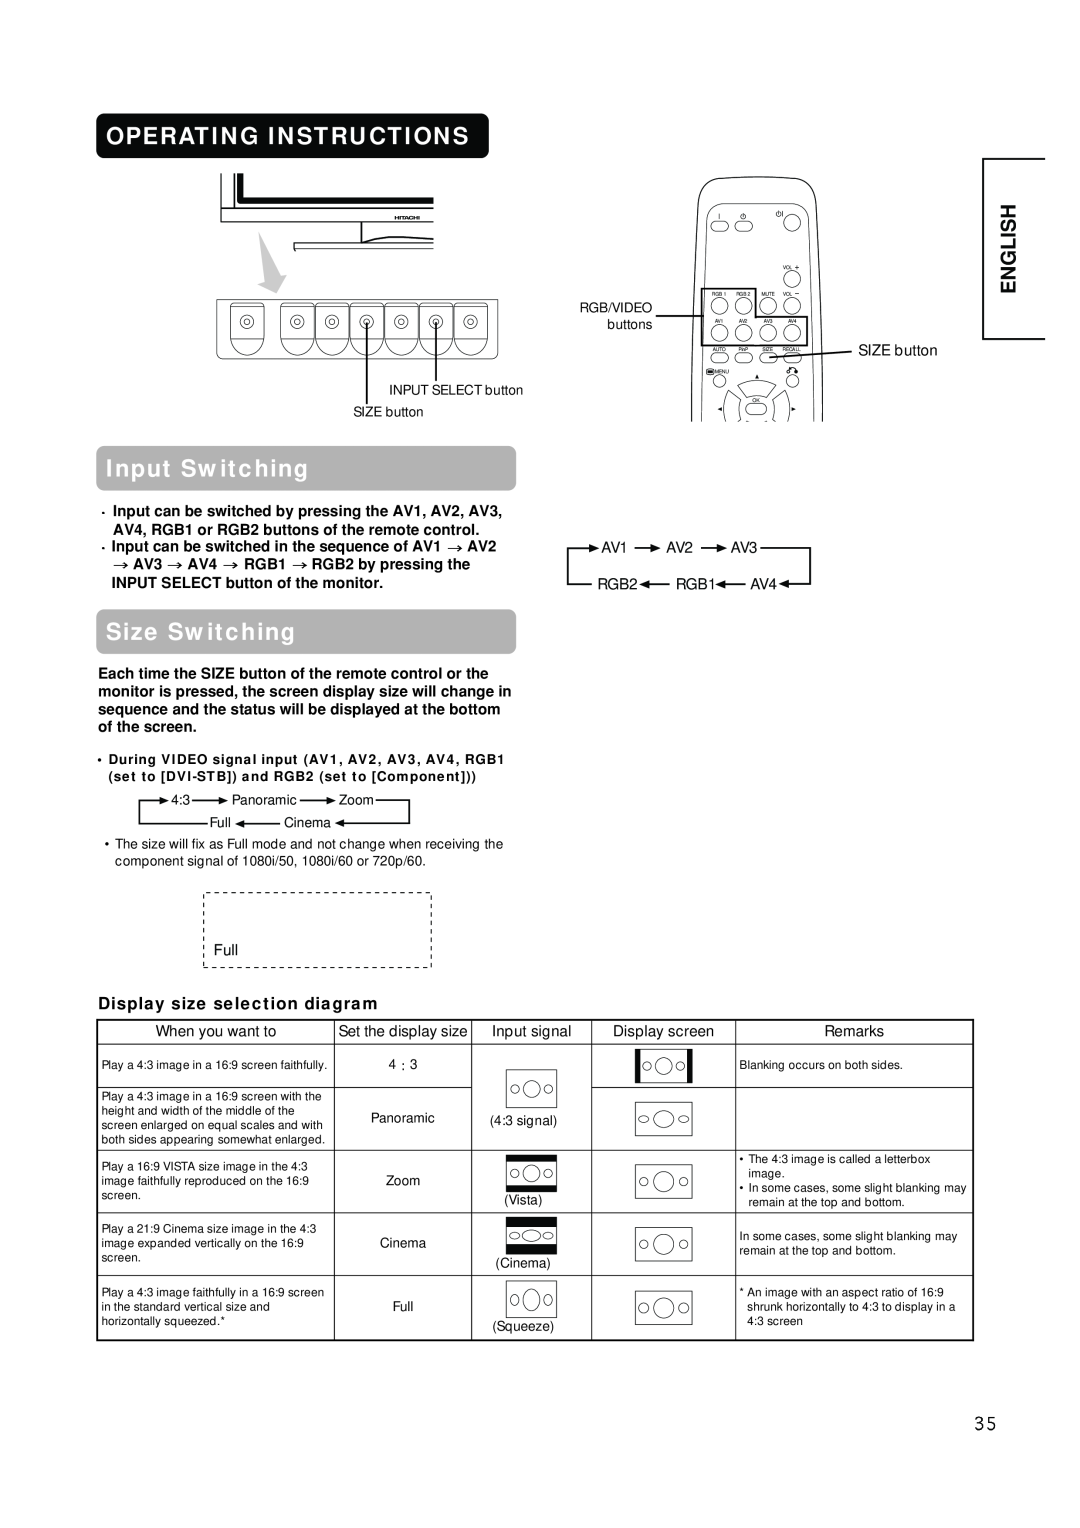 Hitachi PW1A user manual Operating Instructions, Input Switching, Size Switching, English, Display size selection diagram 